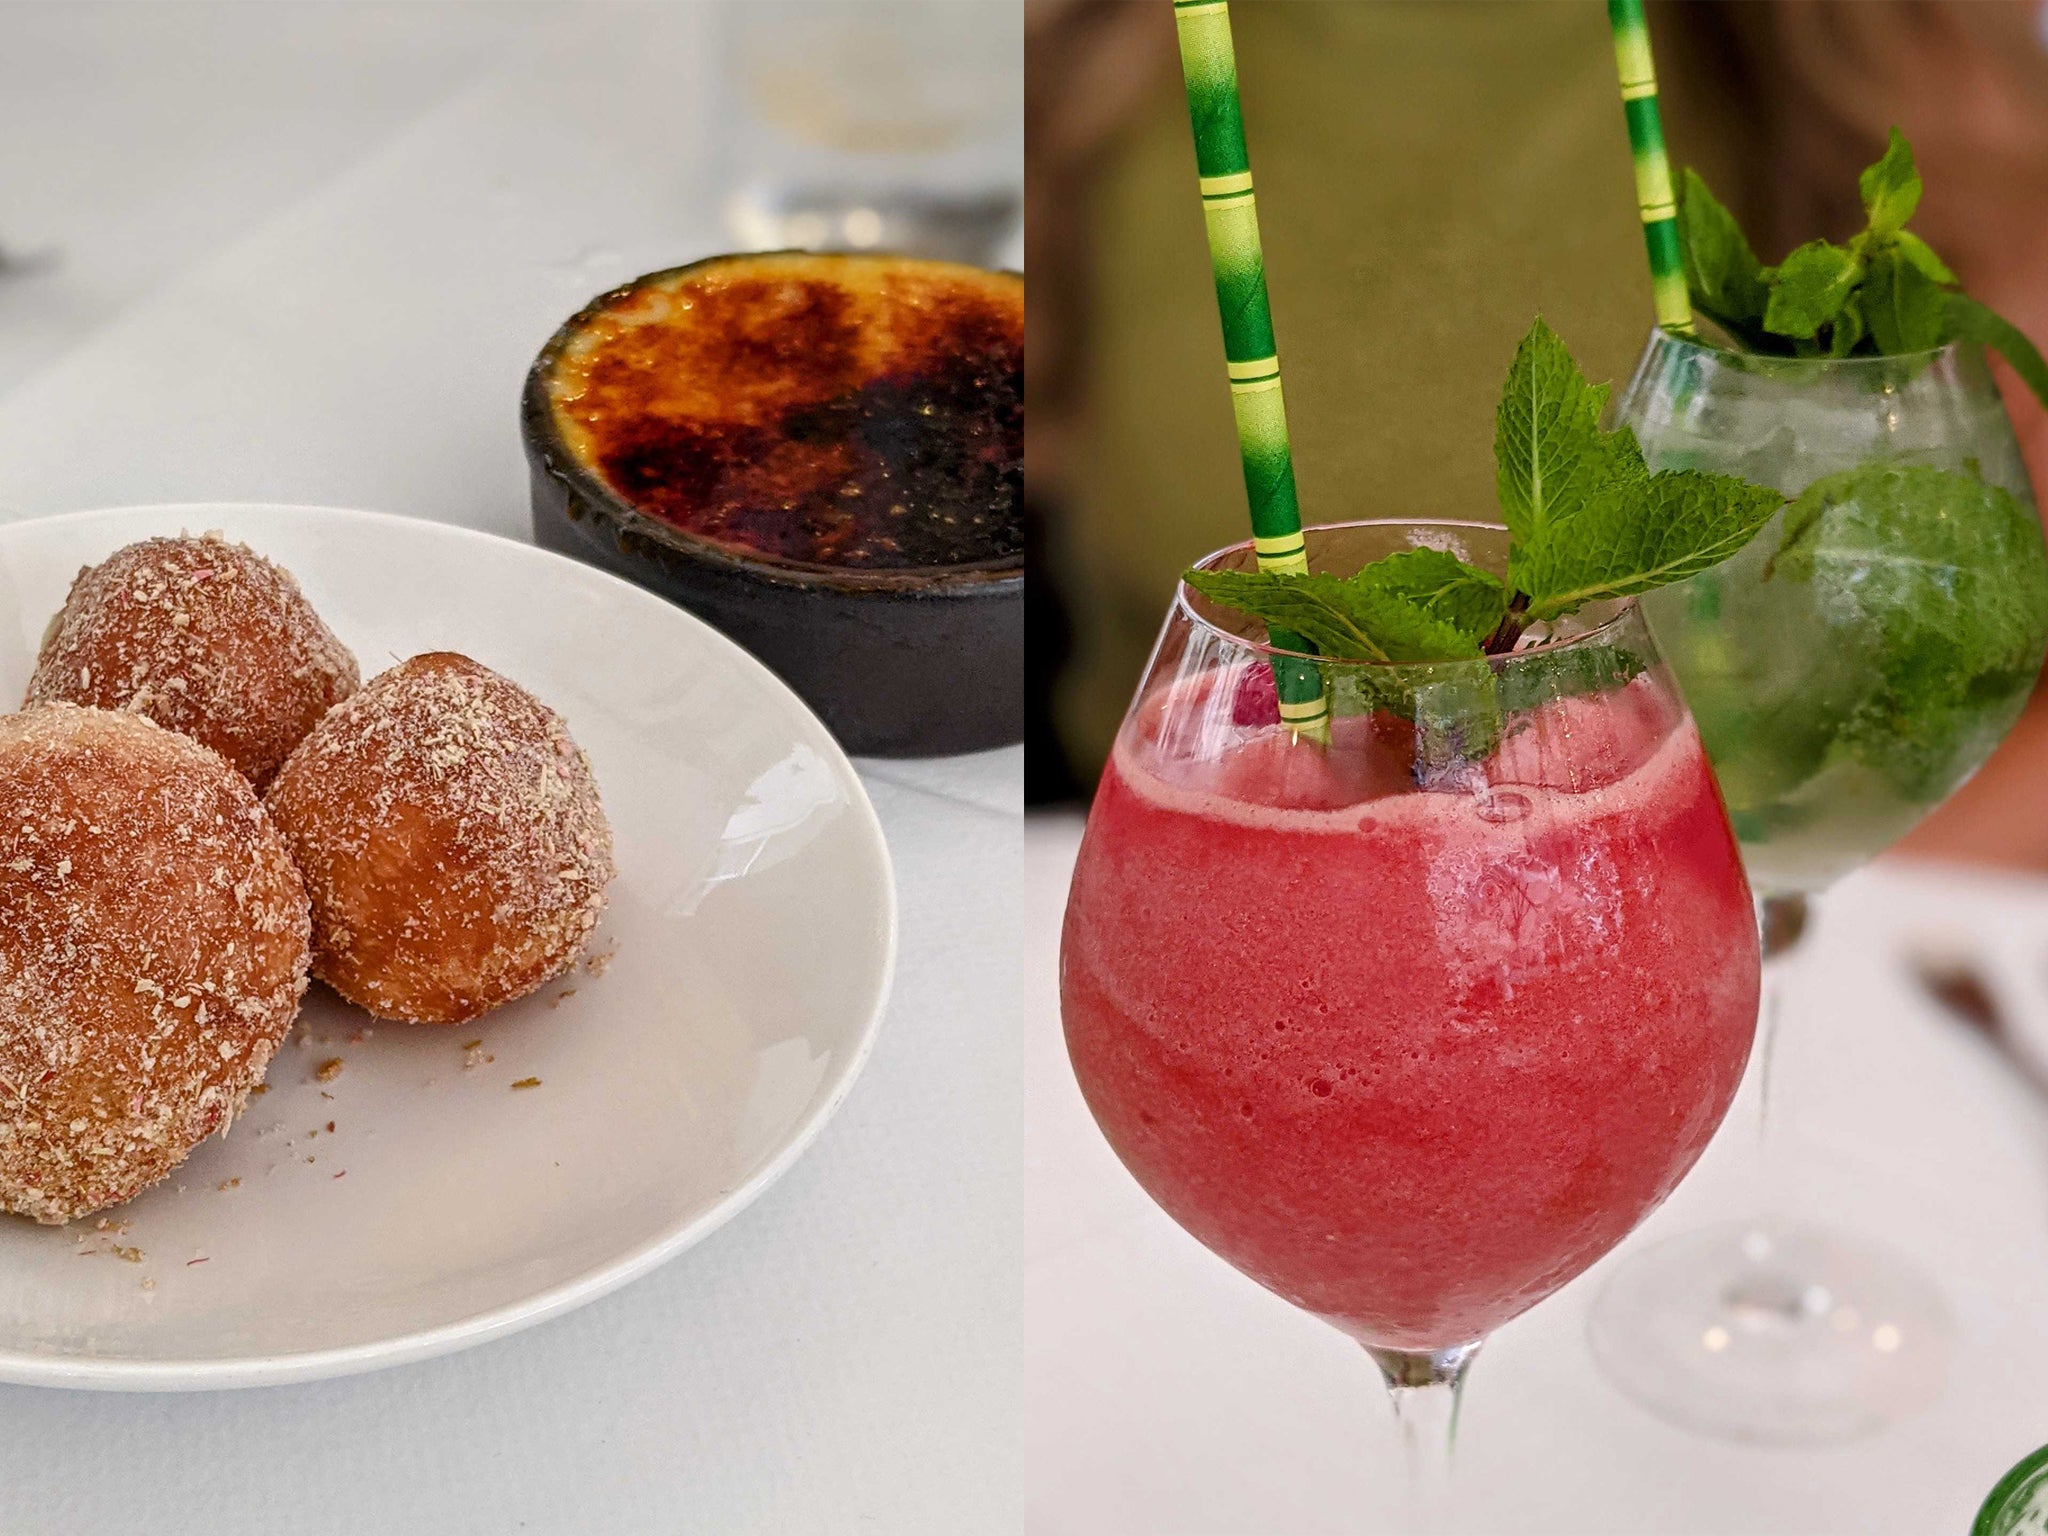 Come for the Amalfi cuisine, stay for these sensational desserts and cocktails